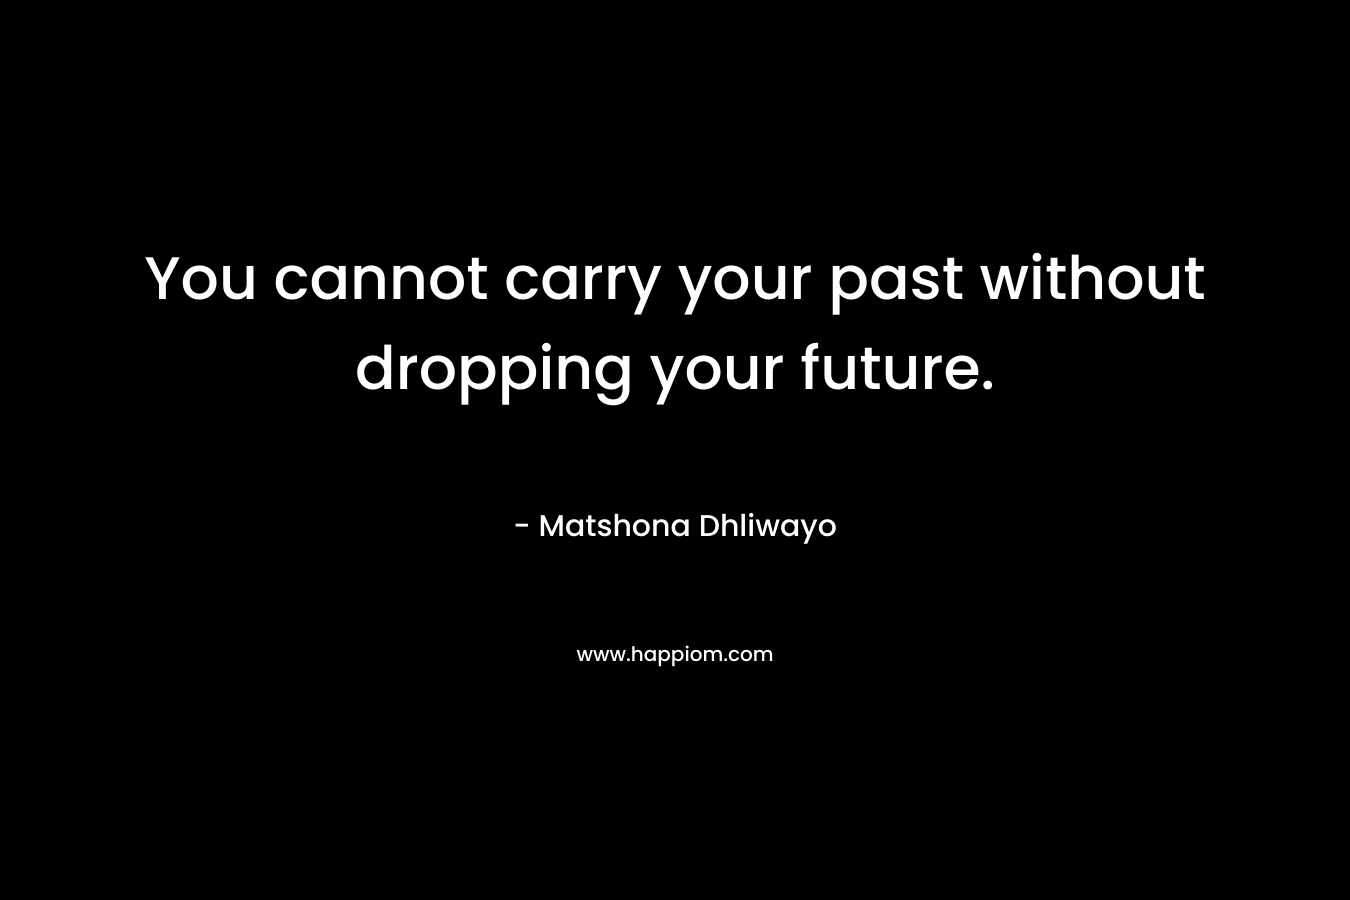 You cannot carry your past without dropping your future.